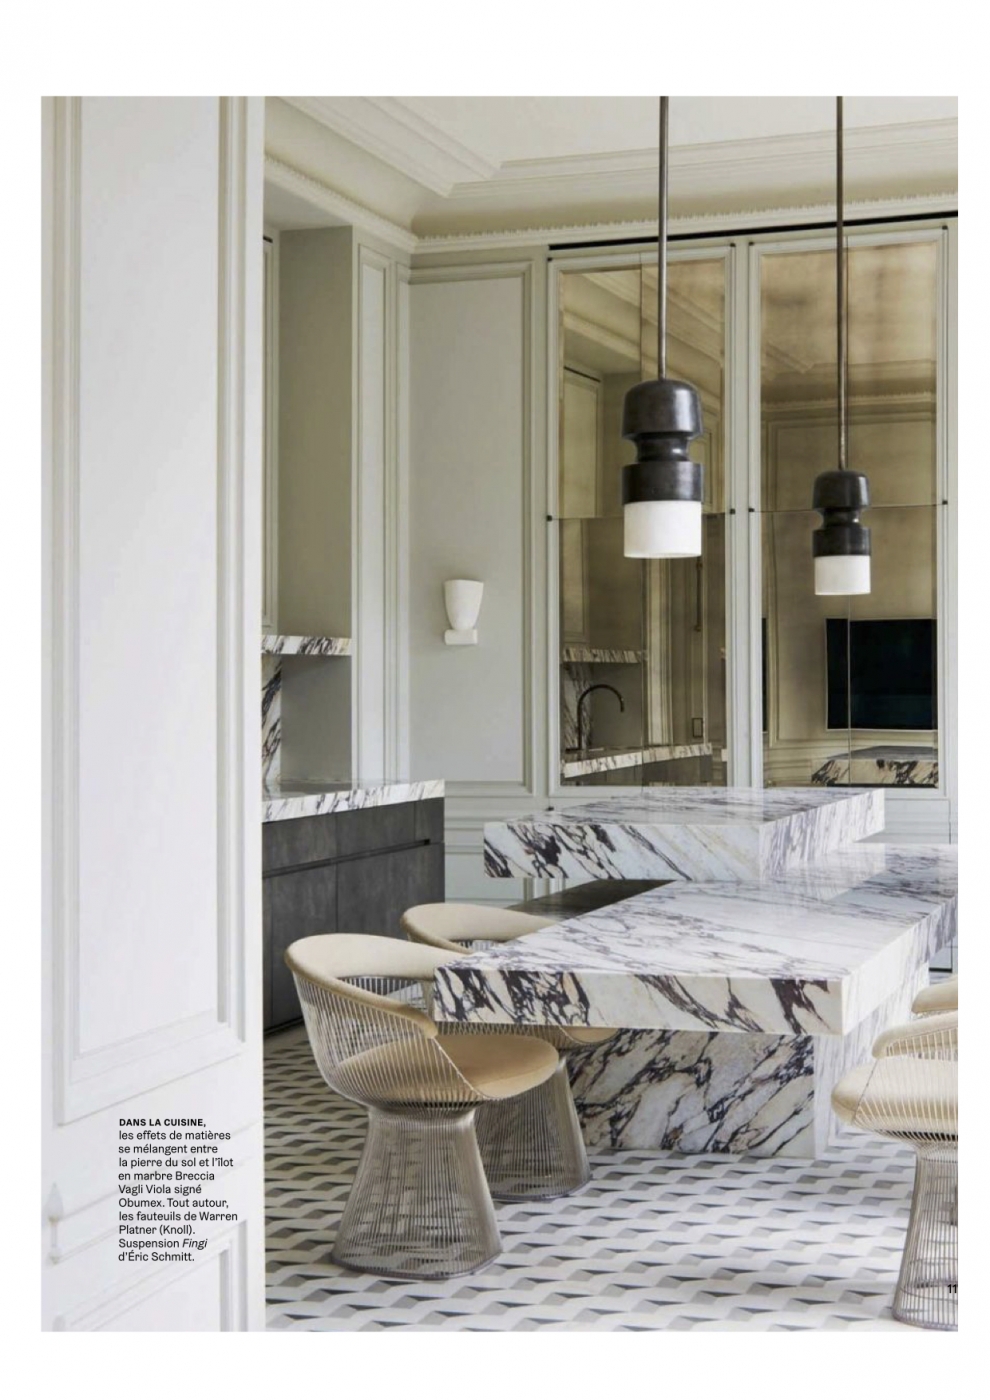 AD. Architectural Digest
